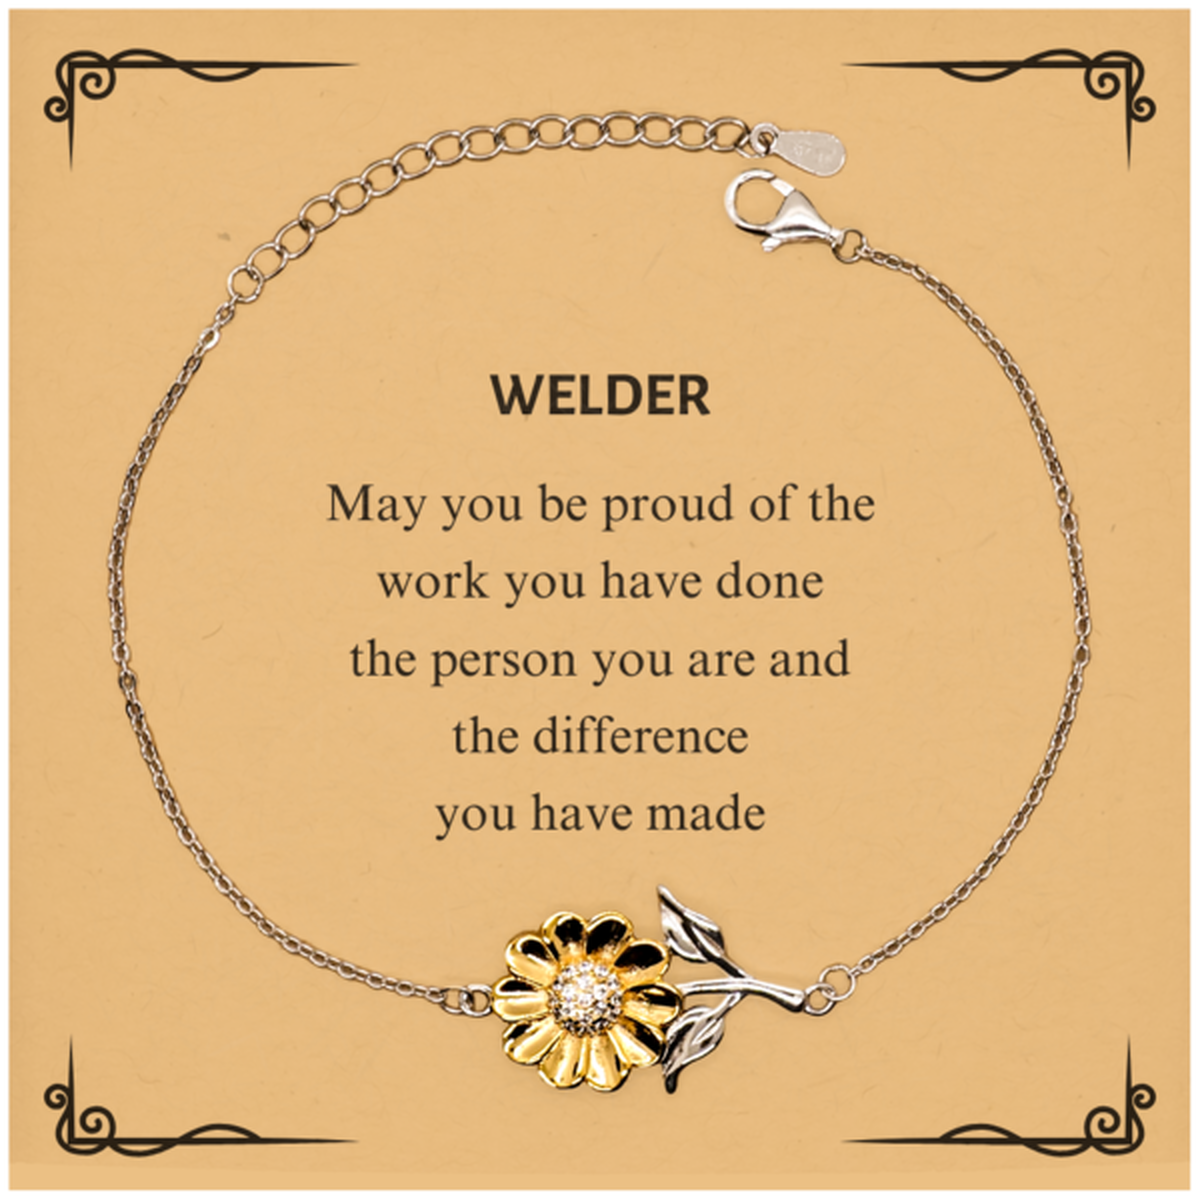 Welder May you be proud of the work you have done, Retirement Welder Sunflower Bracelet for Colleague Appreciation Gifts Amazing for Welder